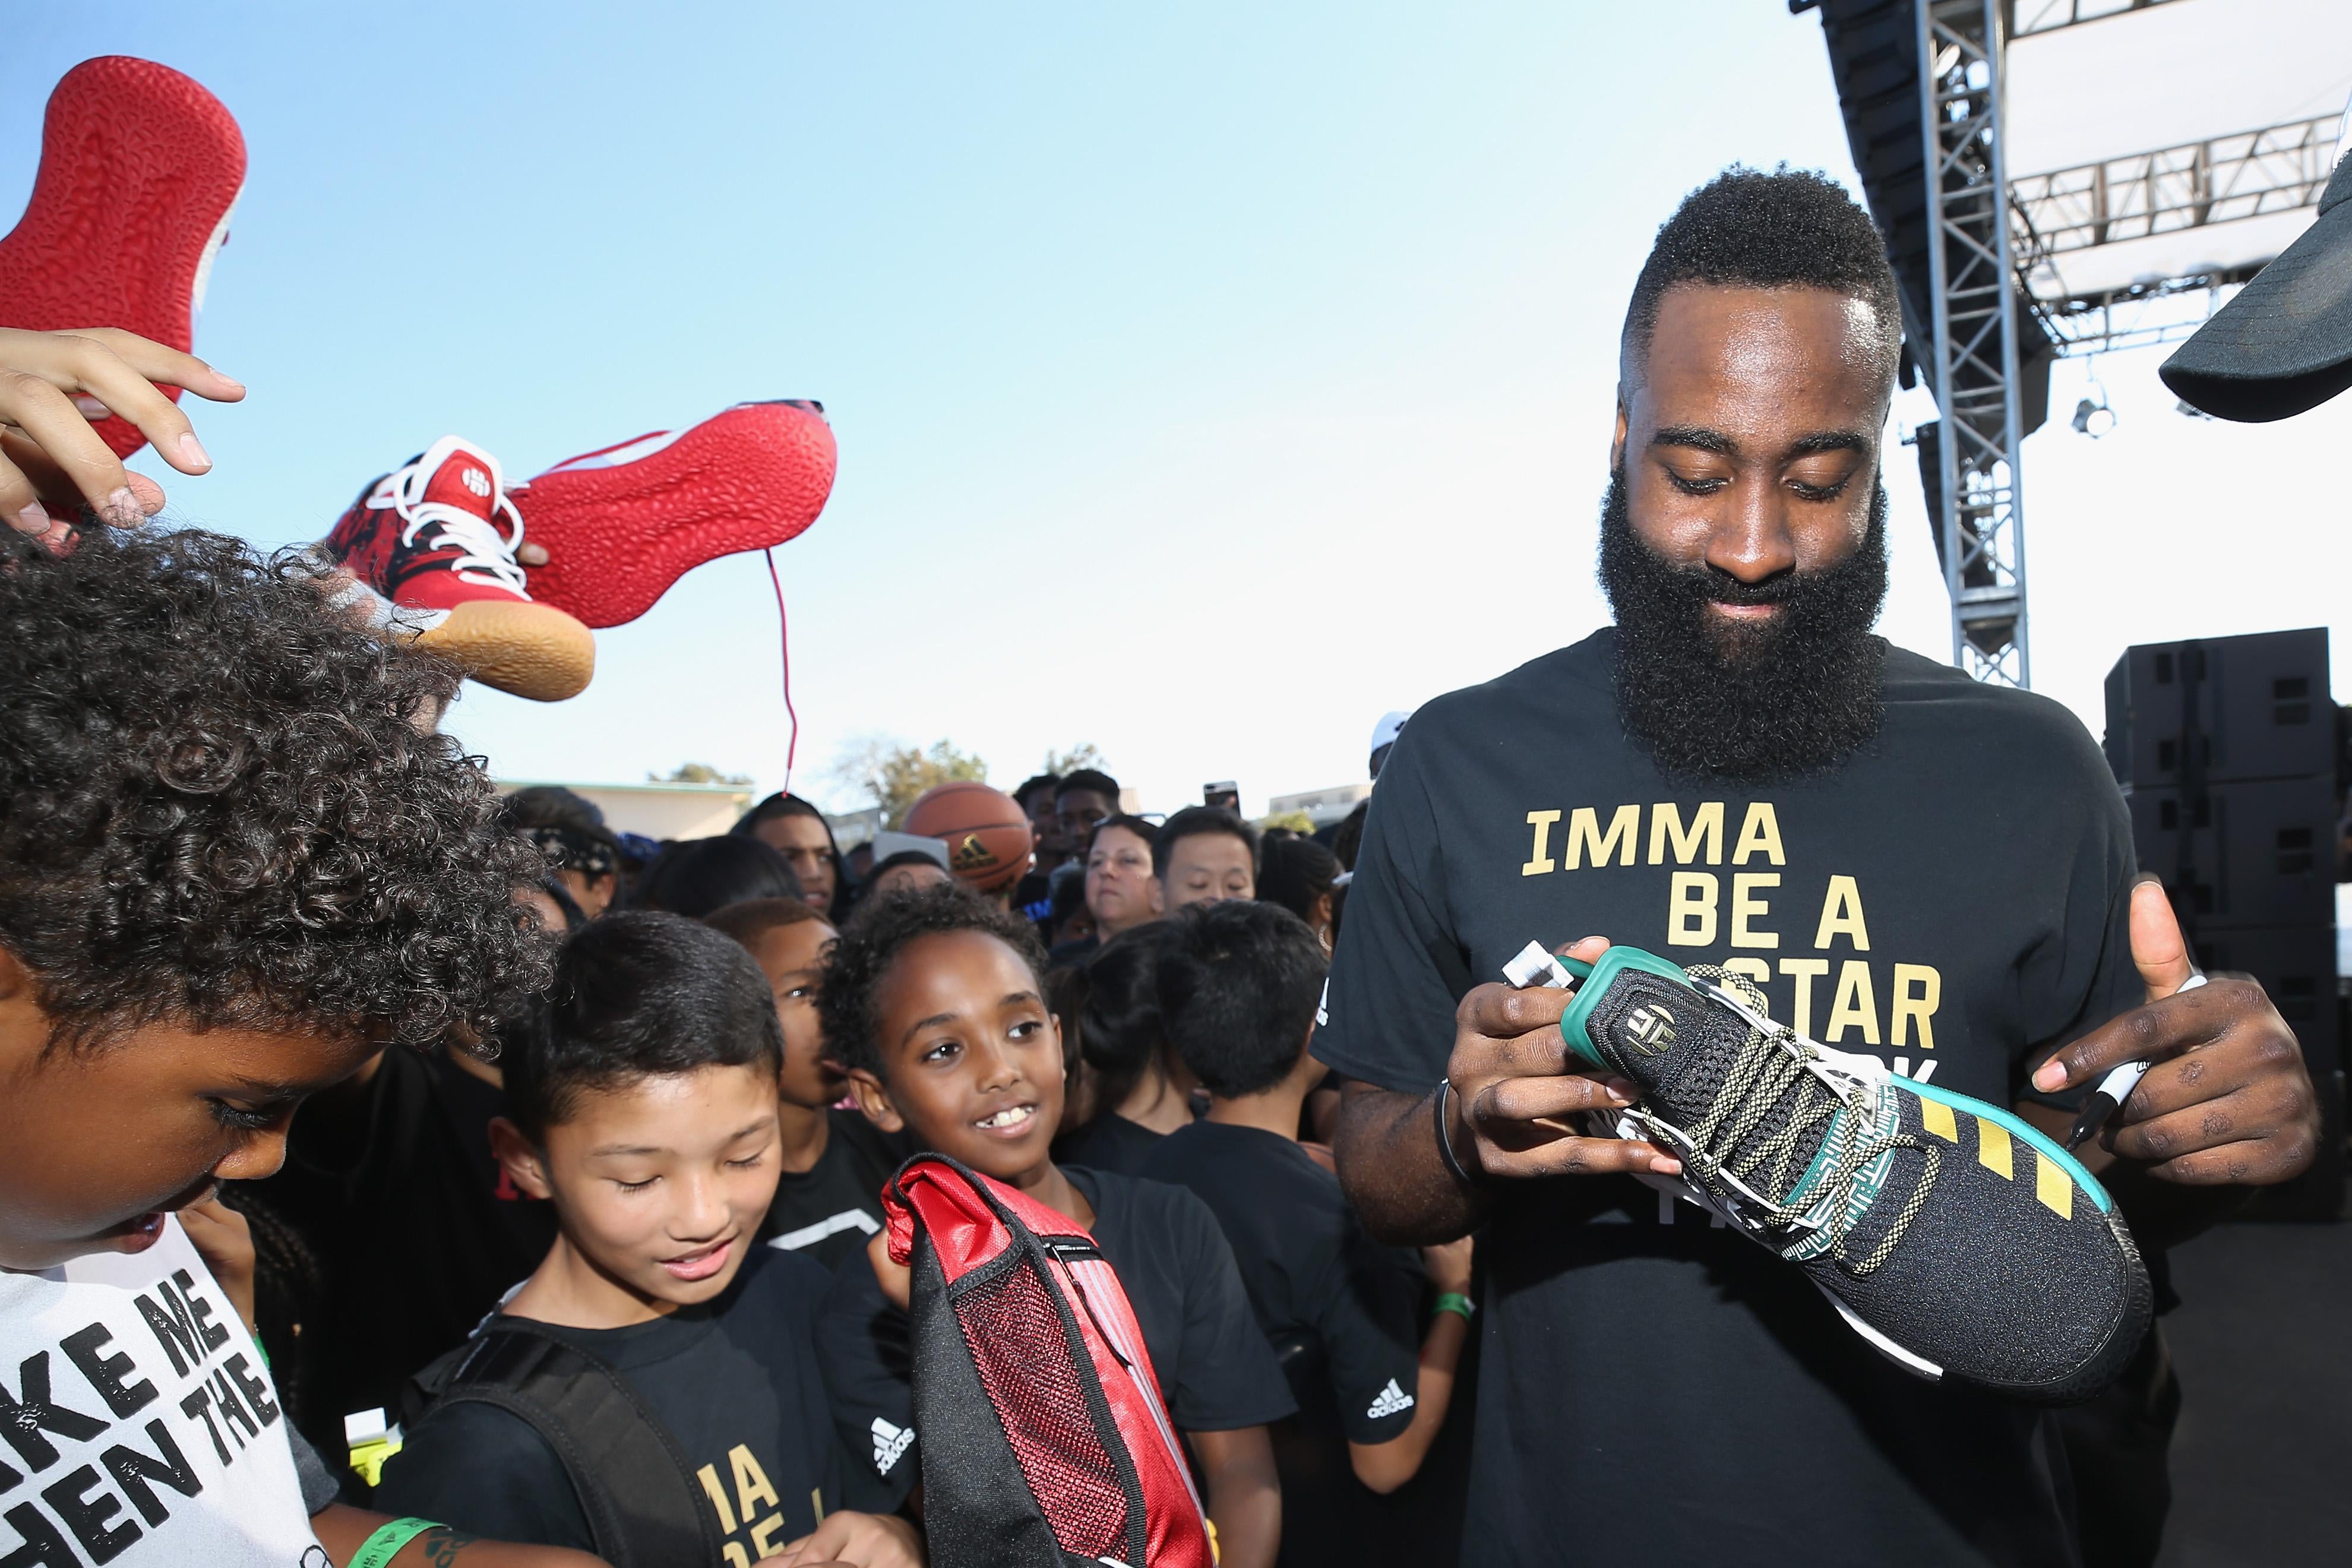 LOS ANGELES, CA - JUNE 24:  James Harden signs autographs at 'Imma Be a Star' Block Party at Audubon Middle School on June 24, 2018 in Los Angeles, California.  (Photo by Phillip Faraone/Getty Images for adidas)